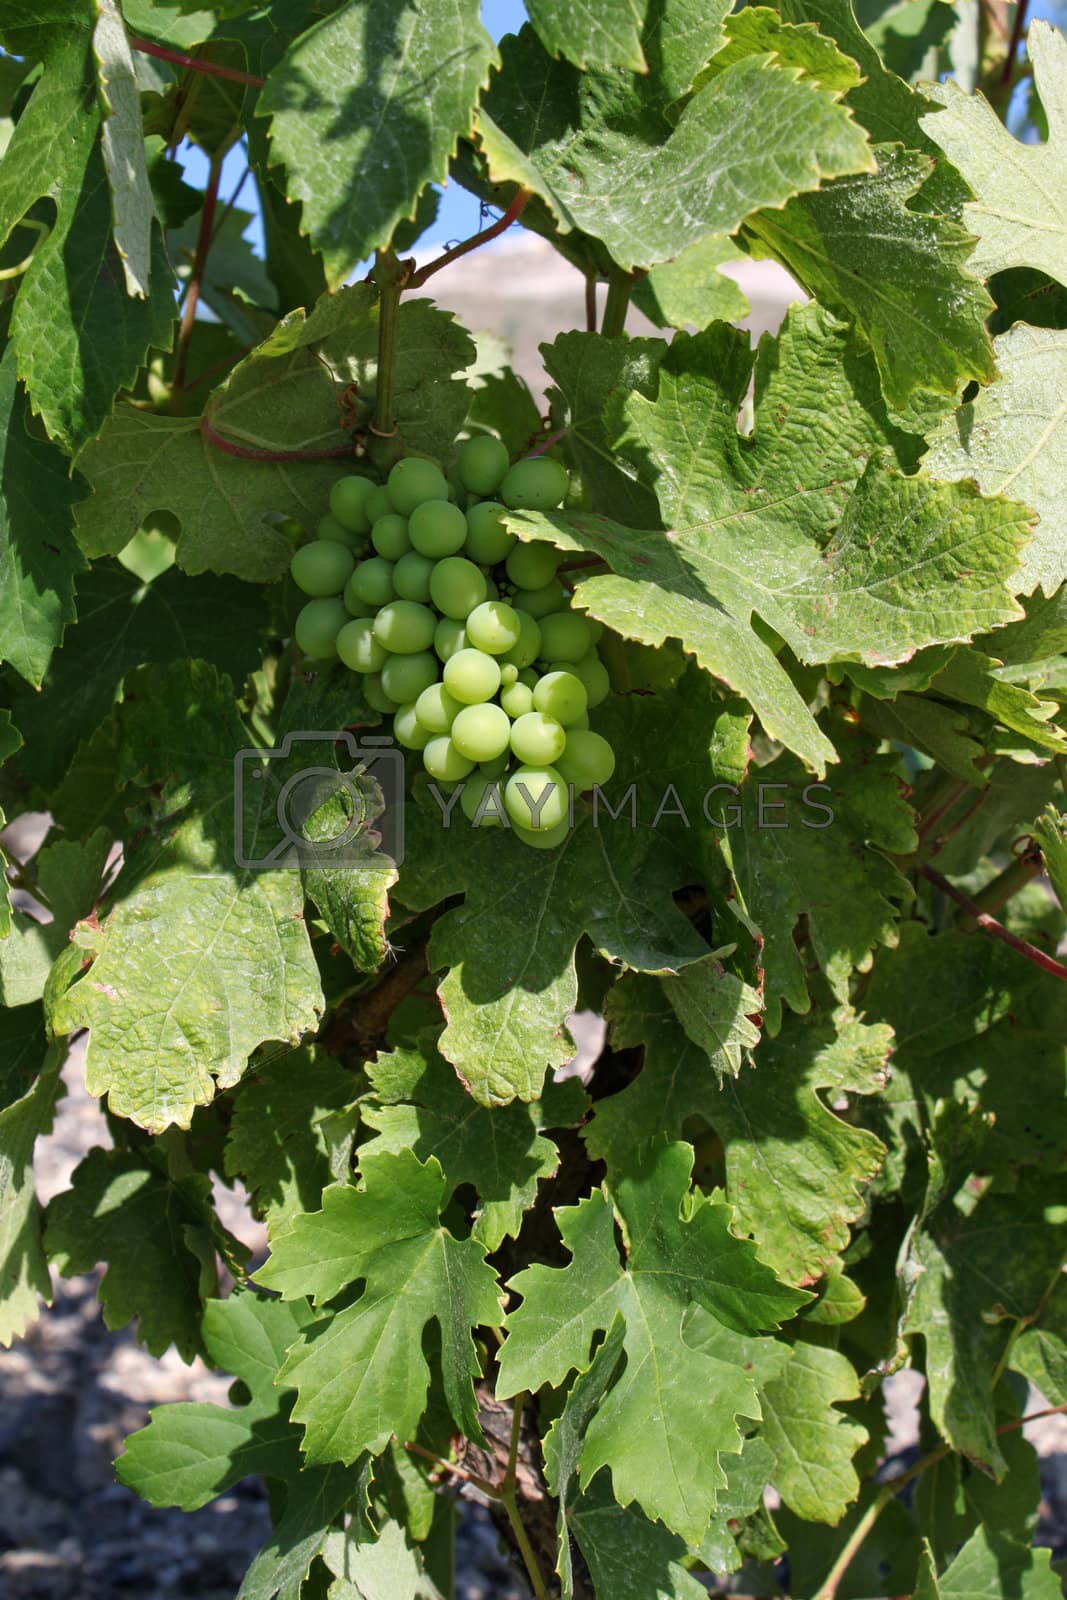 Royalty free image of Fresh green wine grapes by anterovium